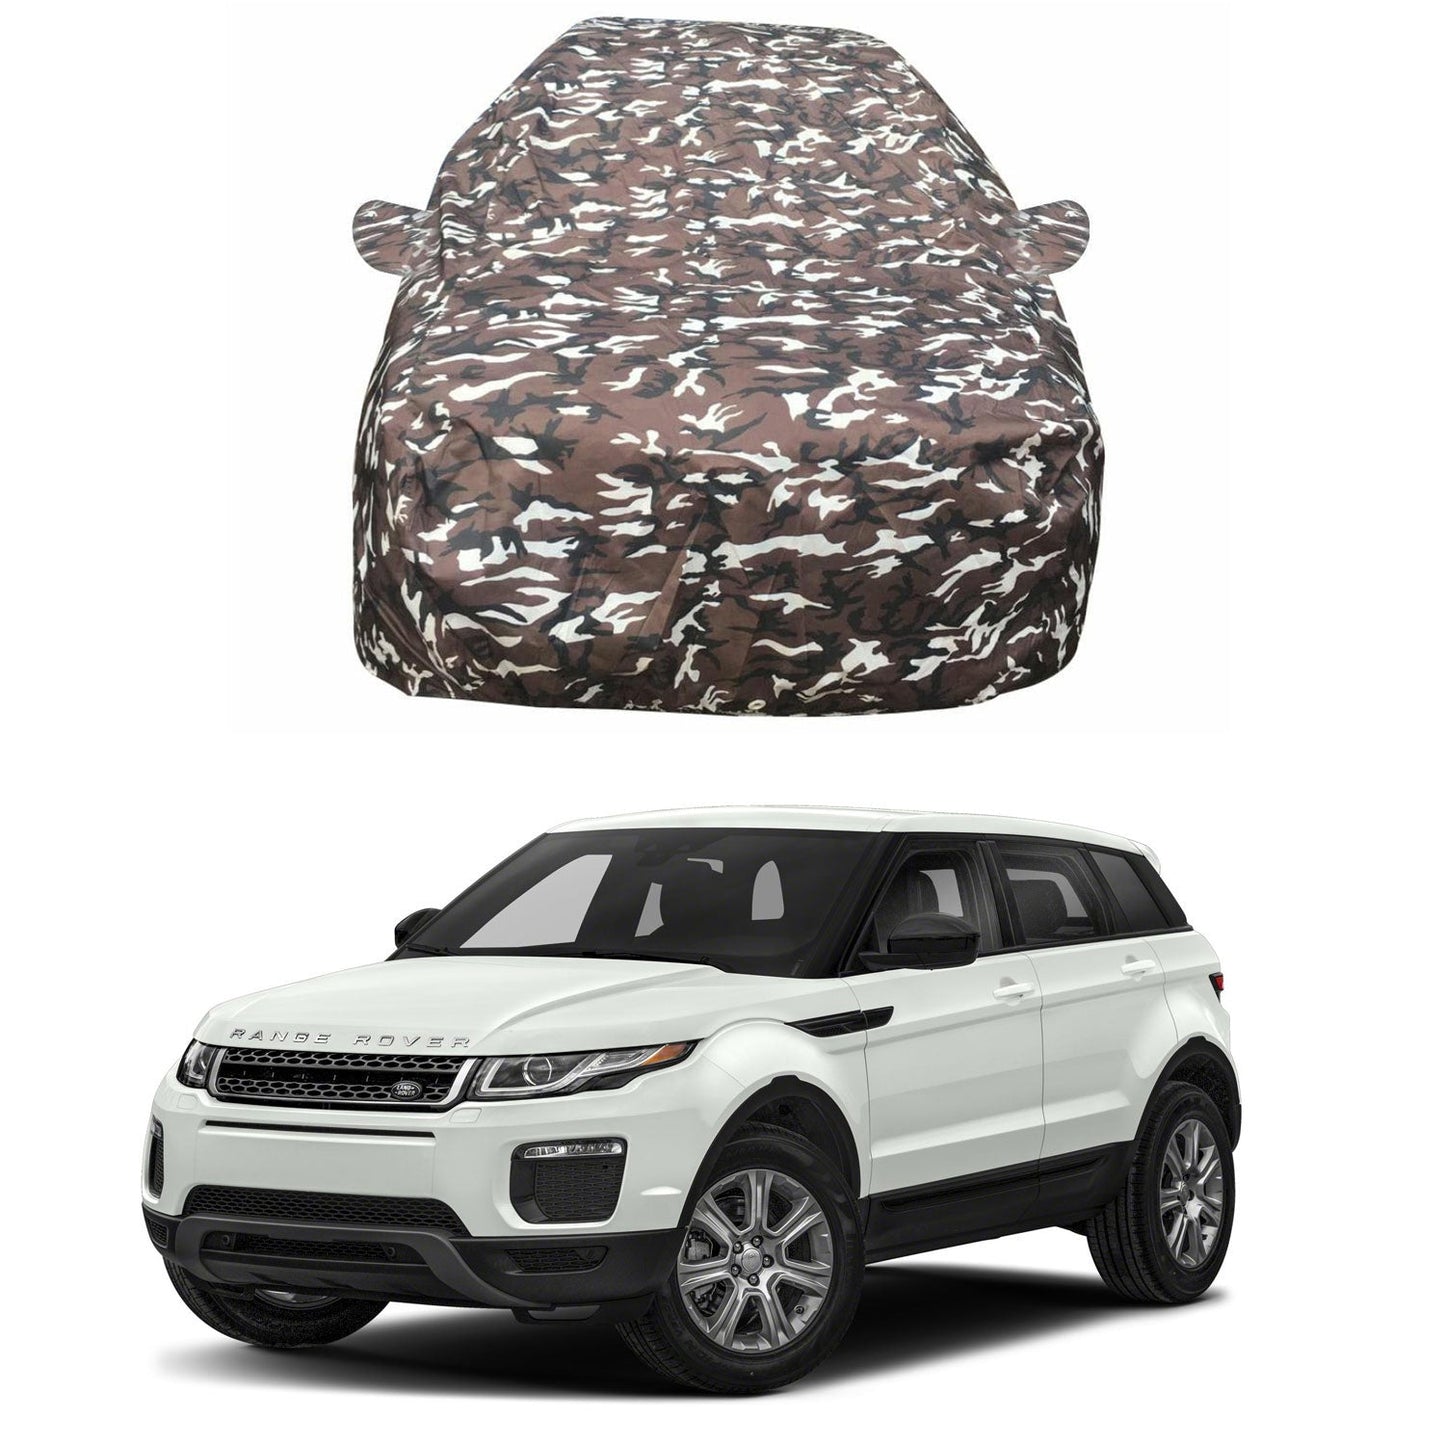 Oshotto Ranger Design Made of 100% Waterproof Fabric Car Body Cover with Mirror Pocket For Range Rover Evoque